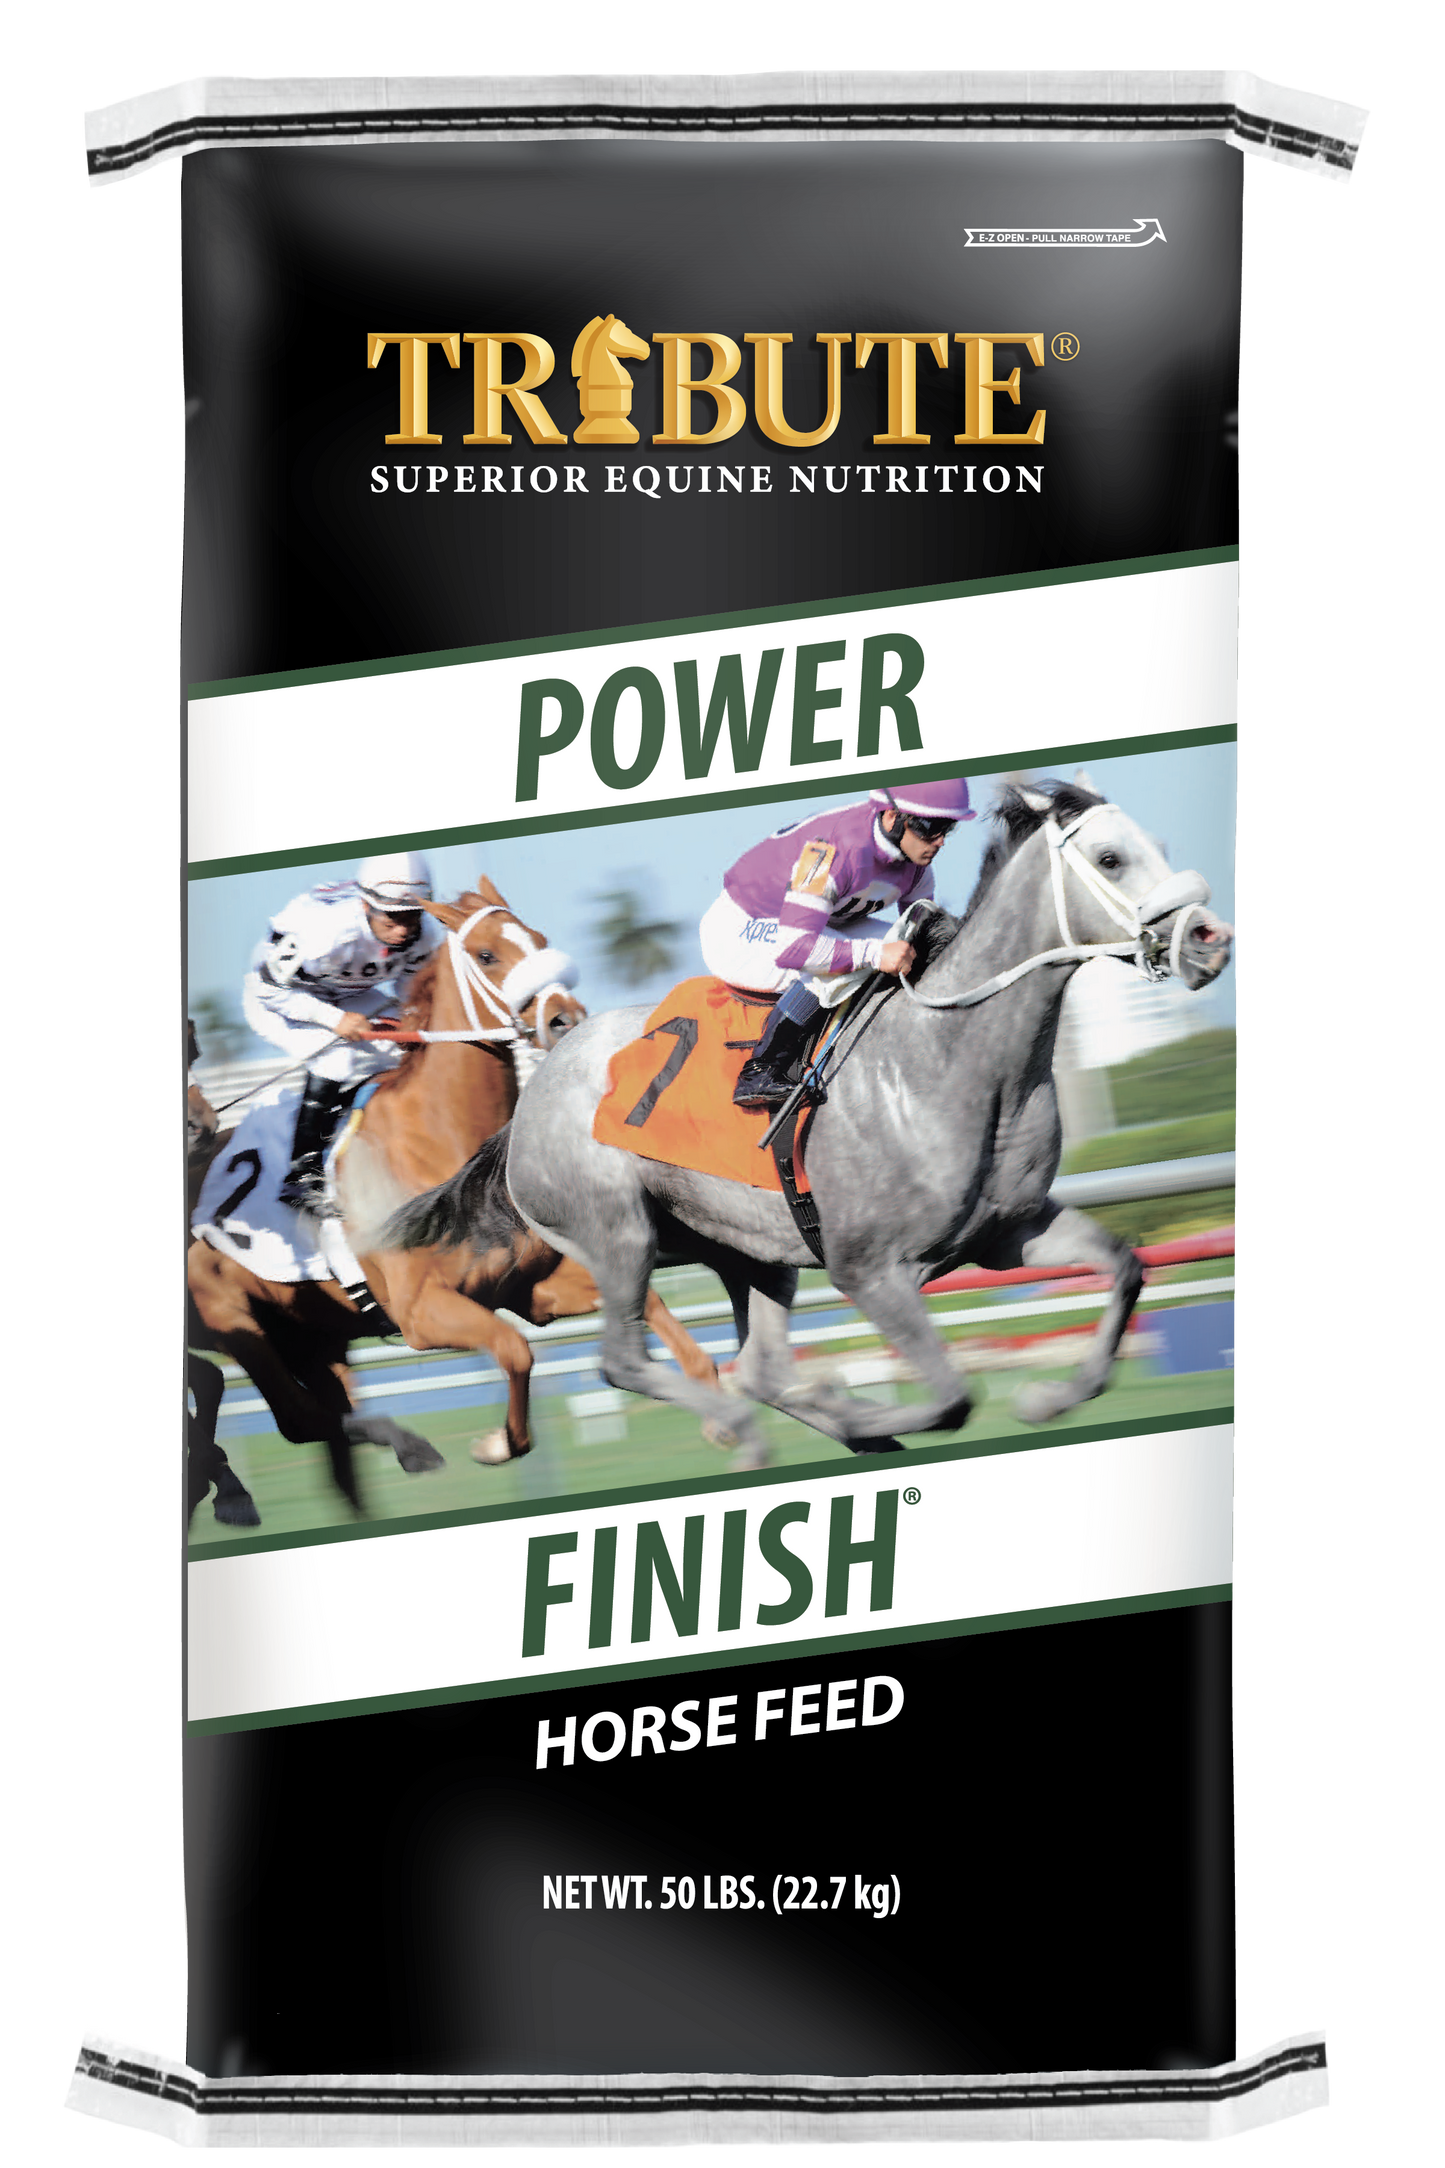 Power Finish®, Textured, Corn-Free Feed for Race Horses